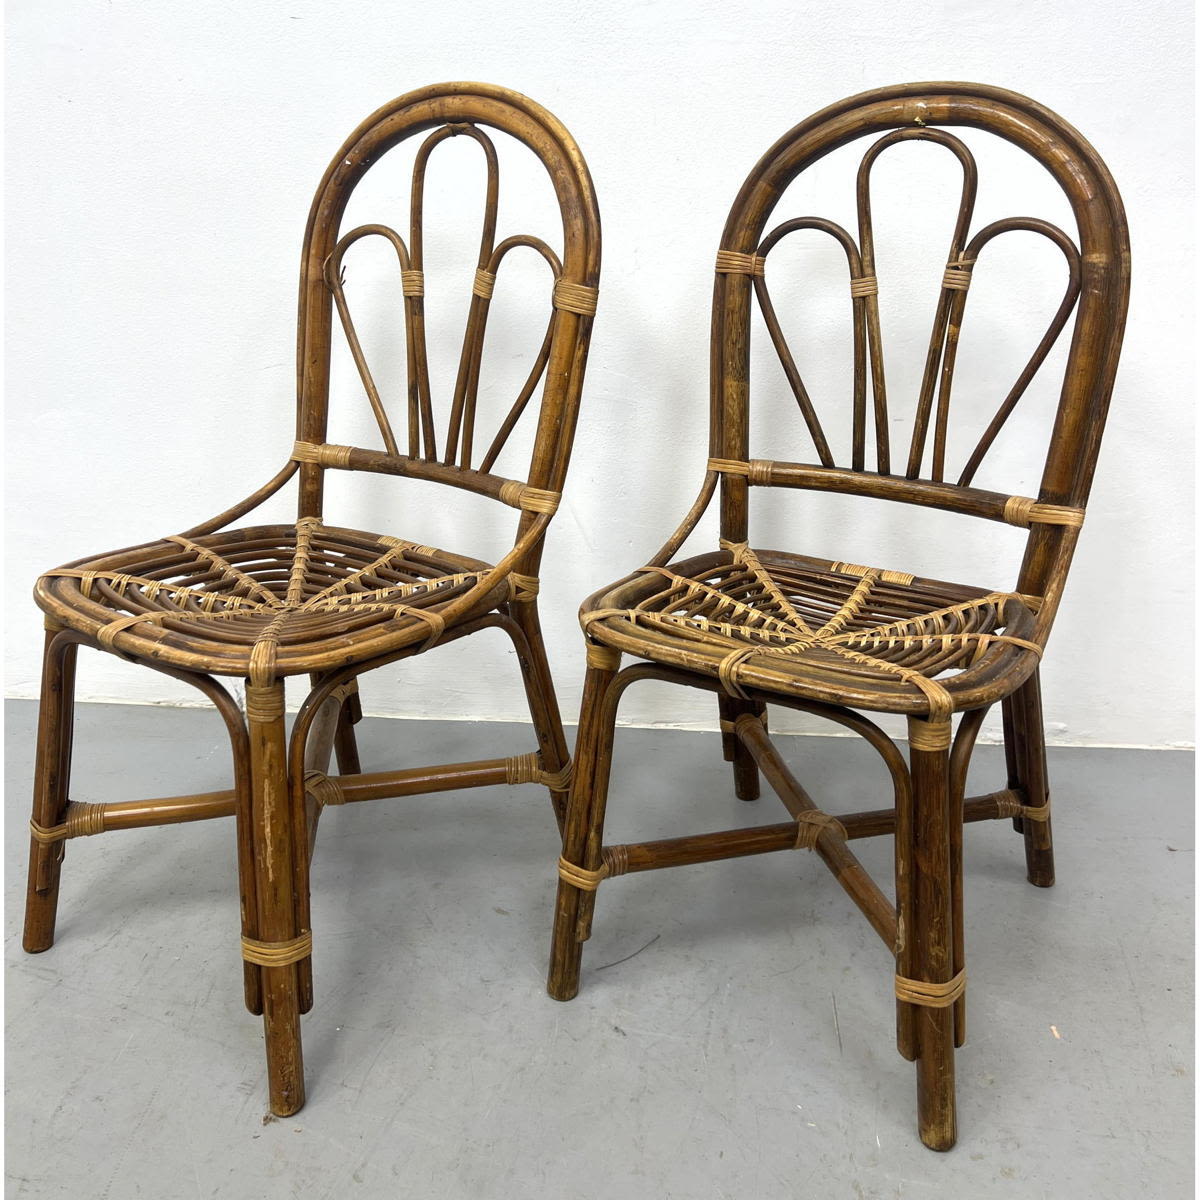 Pair Wicker and Bamboo Chairs.